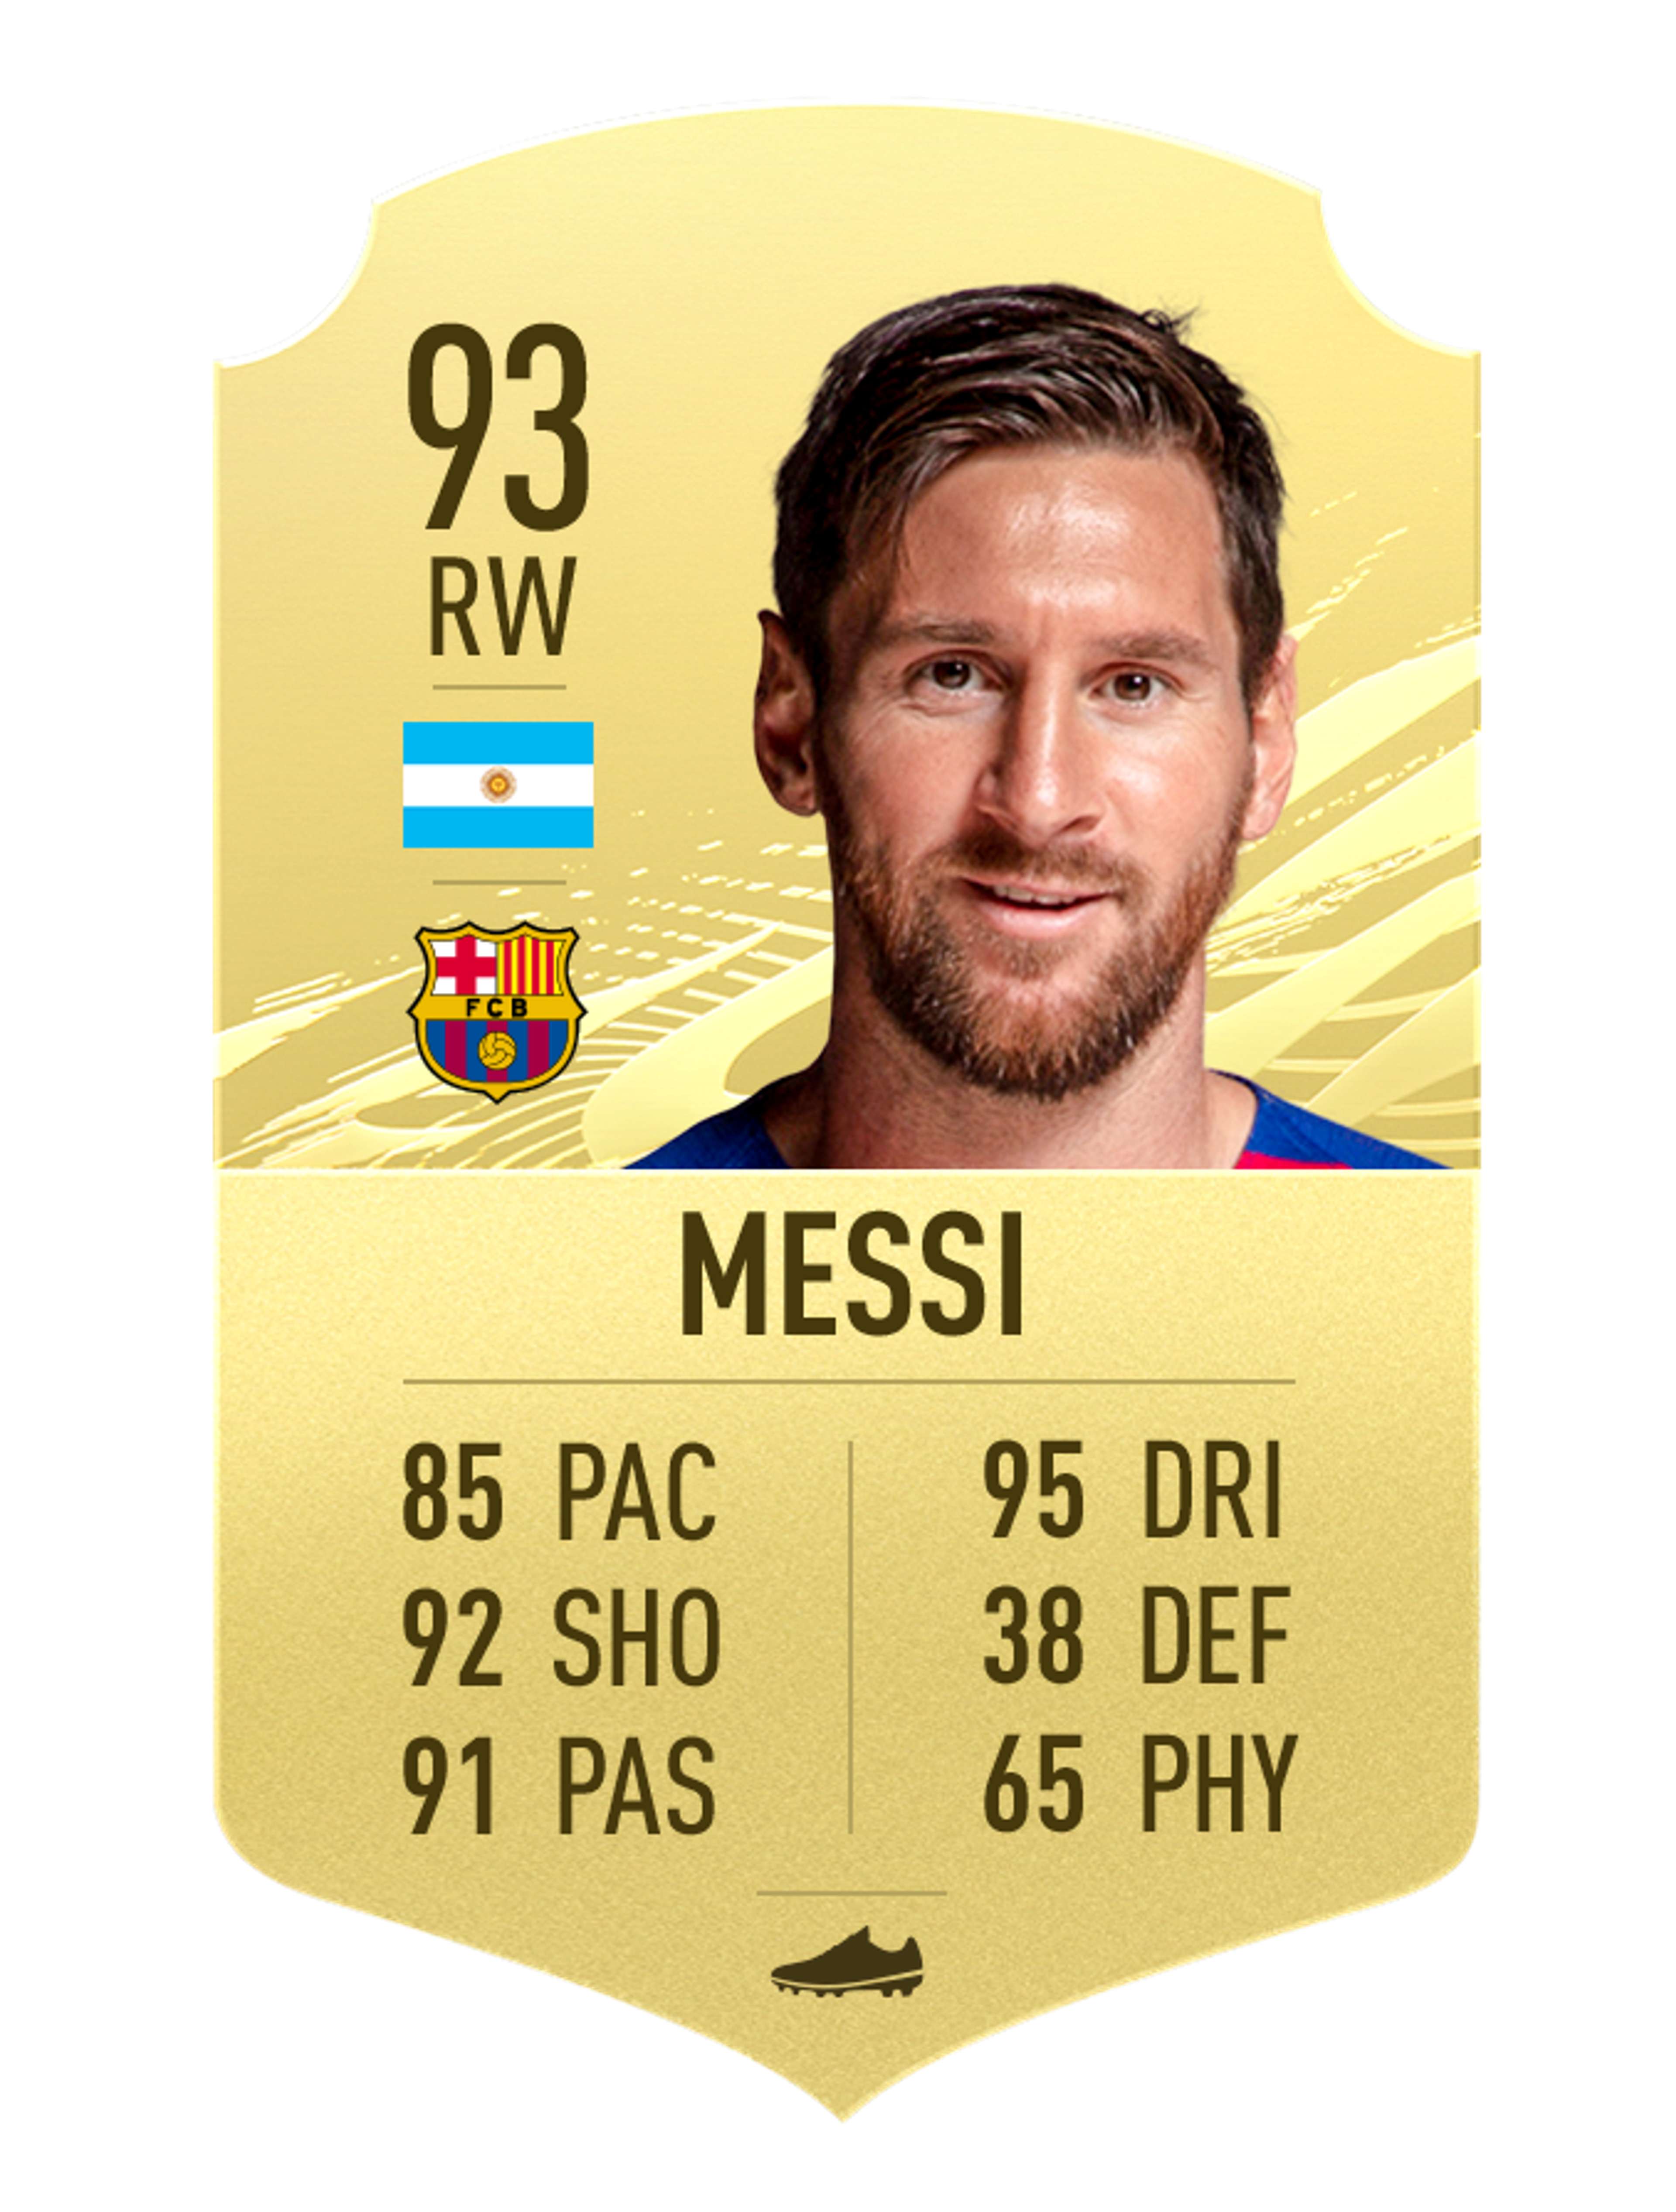 EMBED ONLY Lionel Messi FIFA 21 rating